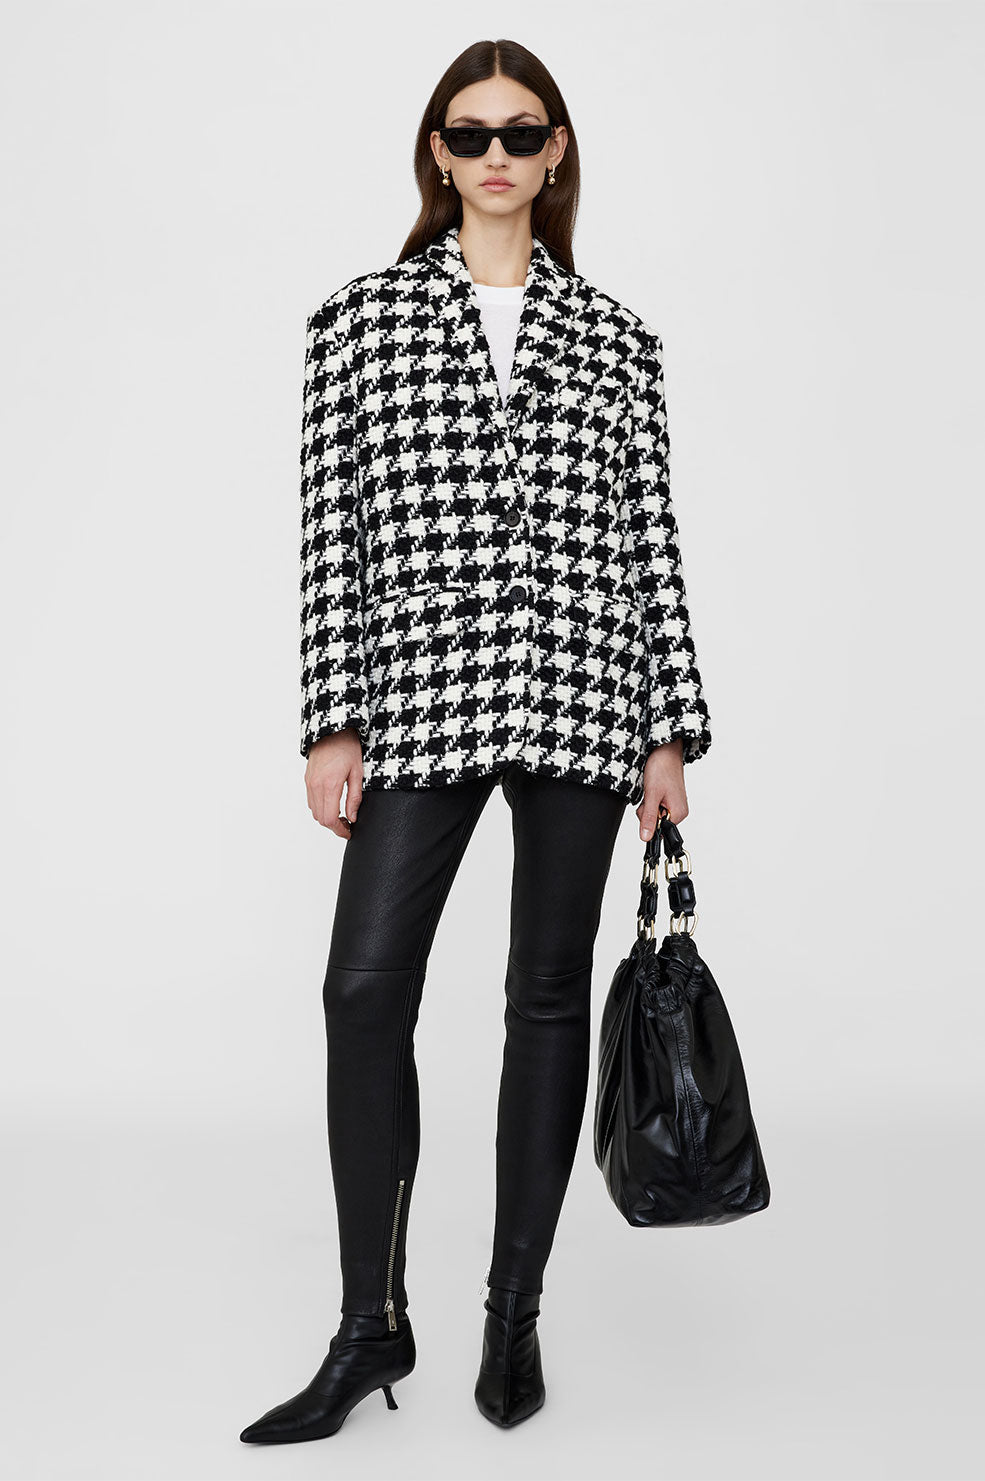 ANINE BING Quinn Blazer - Black And White Houndstooth - On Model Front Second Image